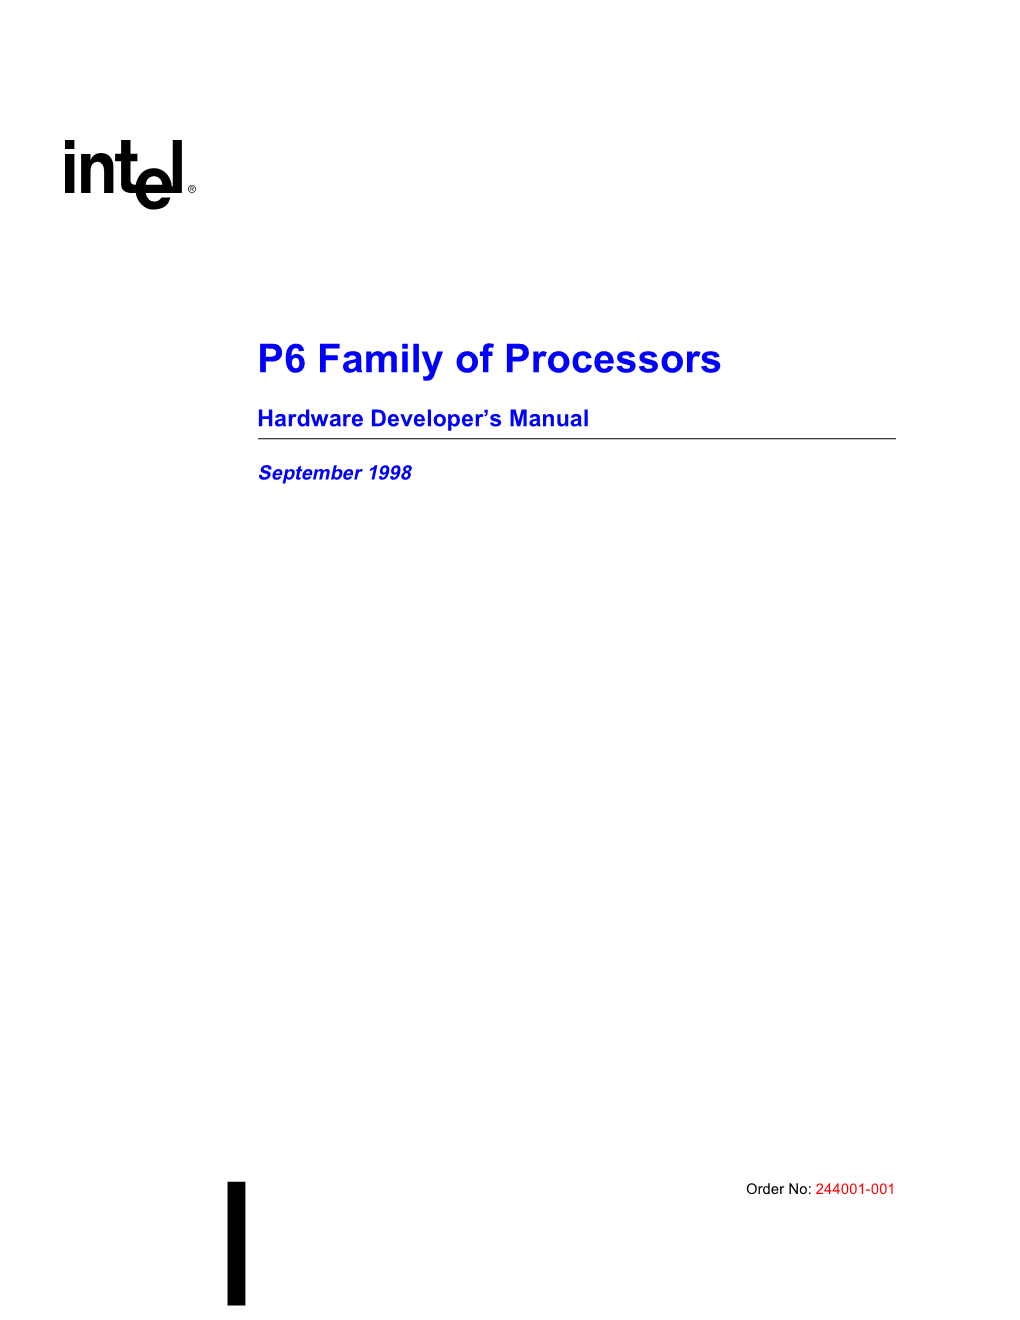 P6 Family of Processors